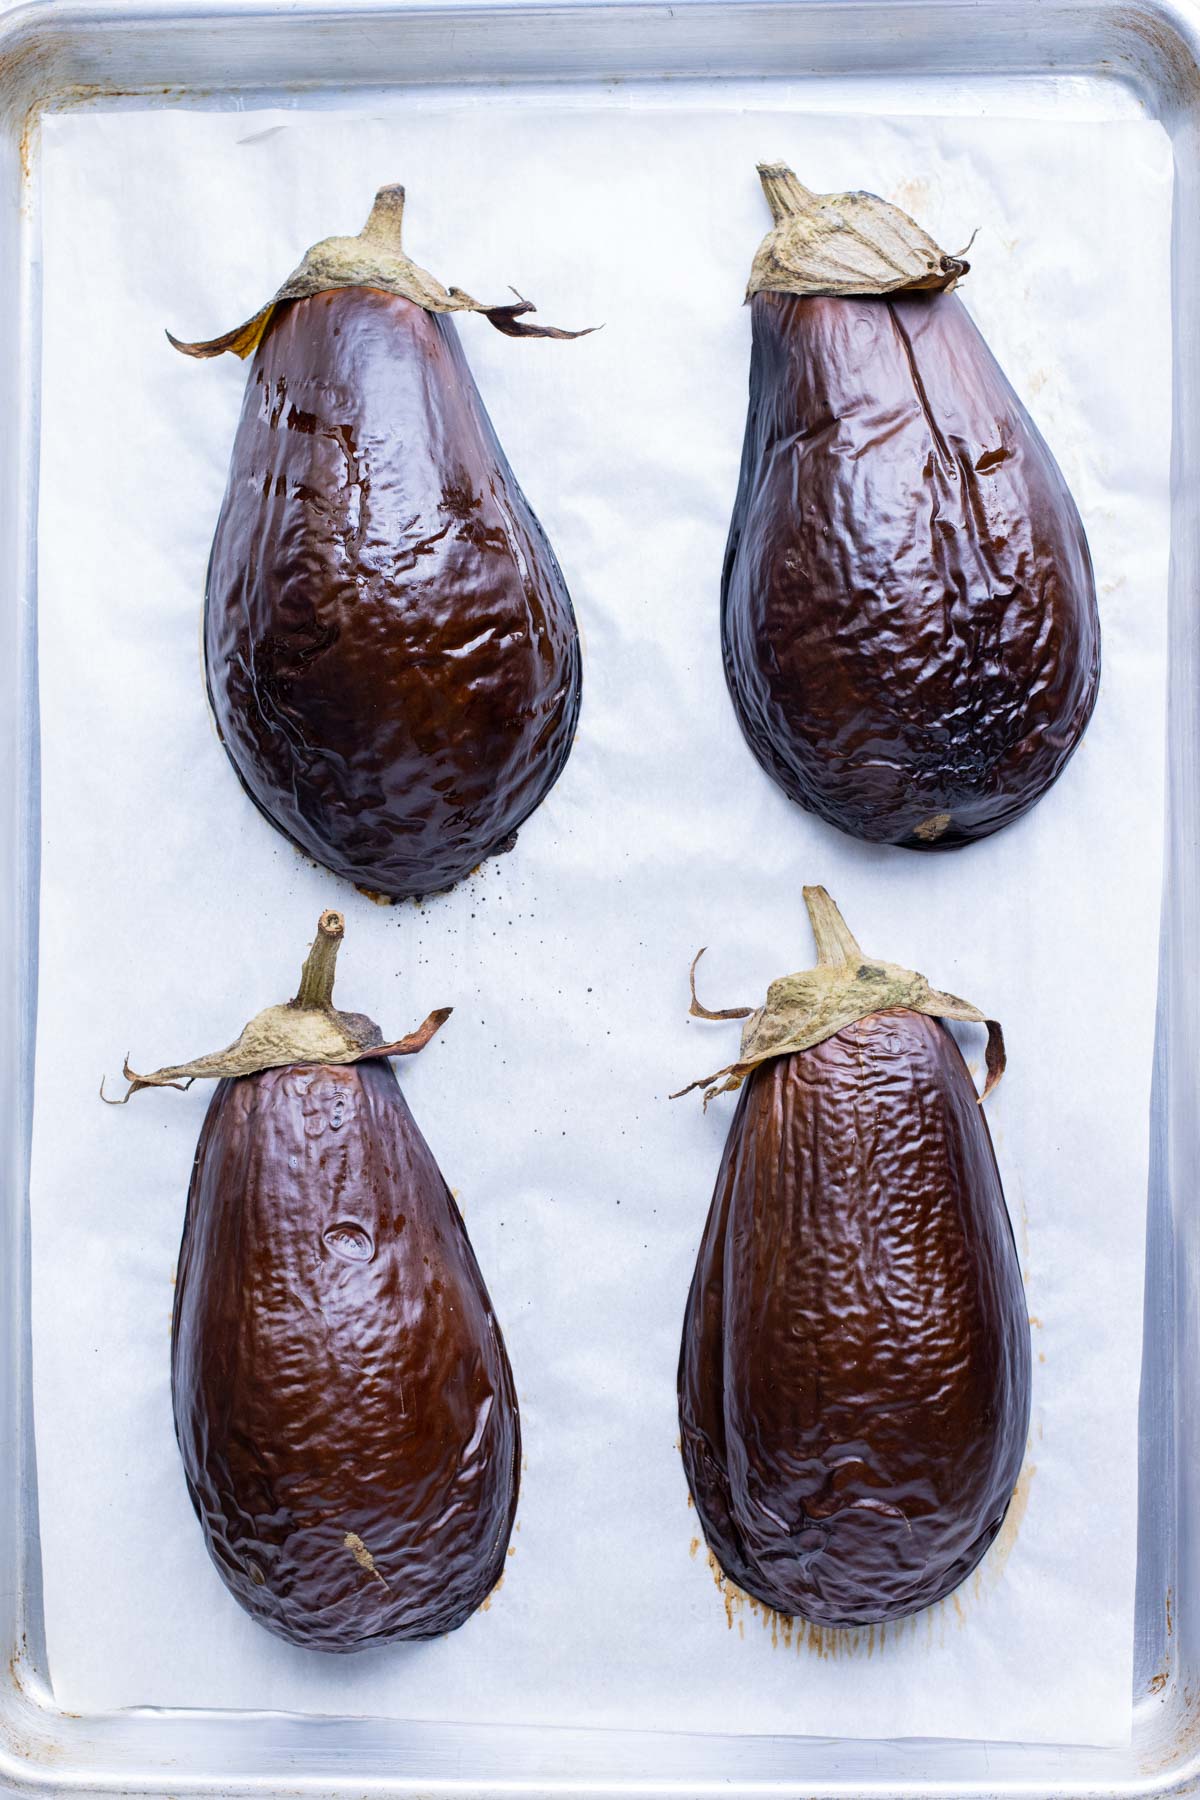 Four eggplant halves are flesh-side down on a baking sheet.